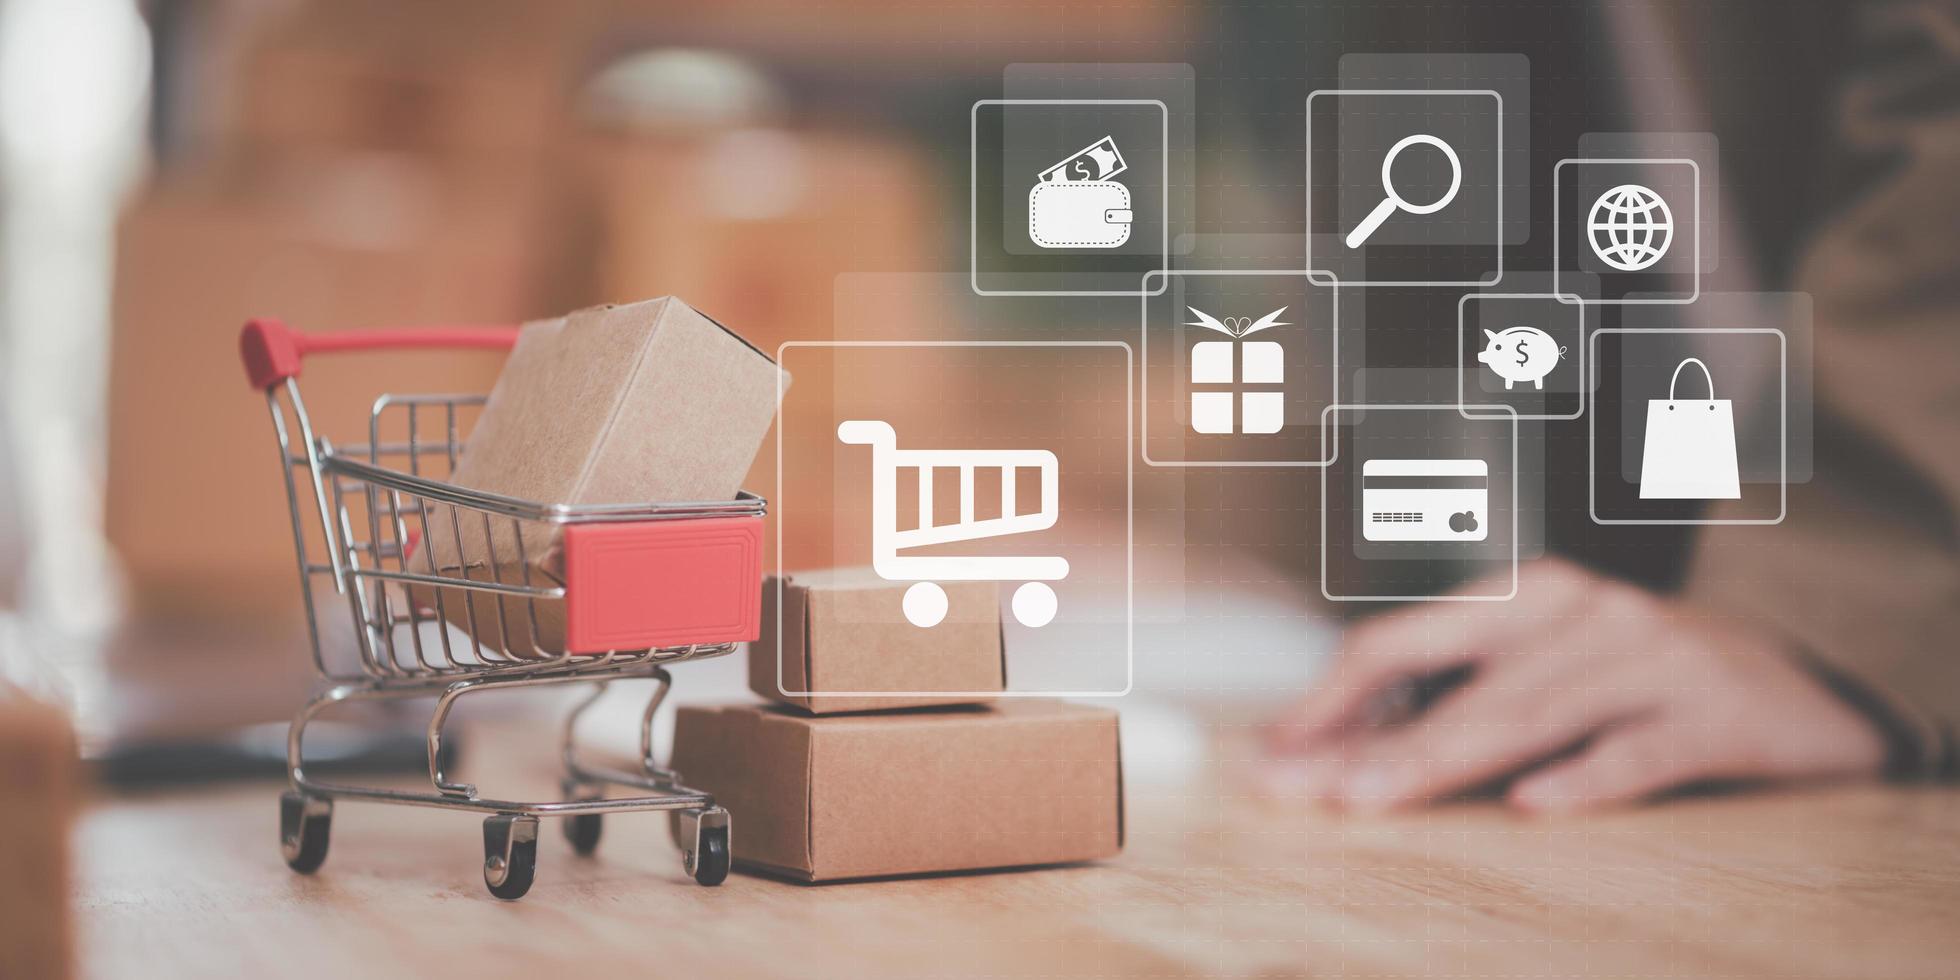 shopping cart, product box, placed on table, shopping concept, online web shopping service and home delivery service, connecting stores and customers worldwide, online payment, consumer society photo